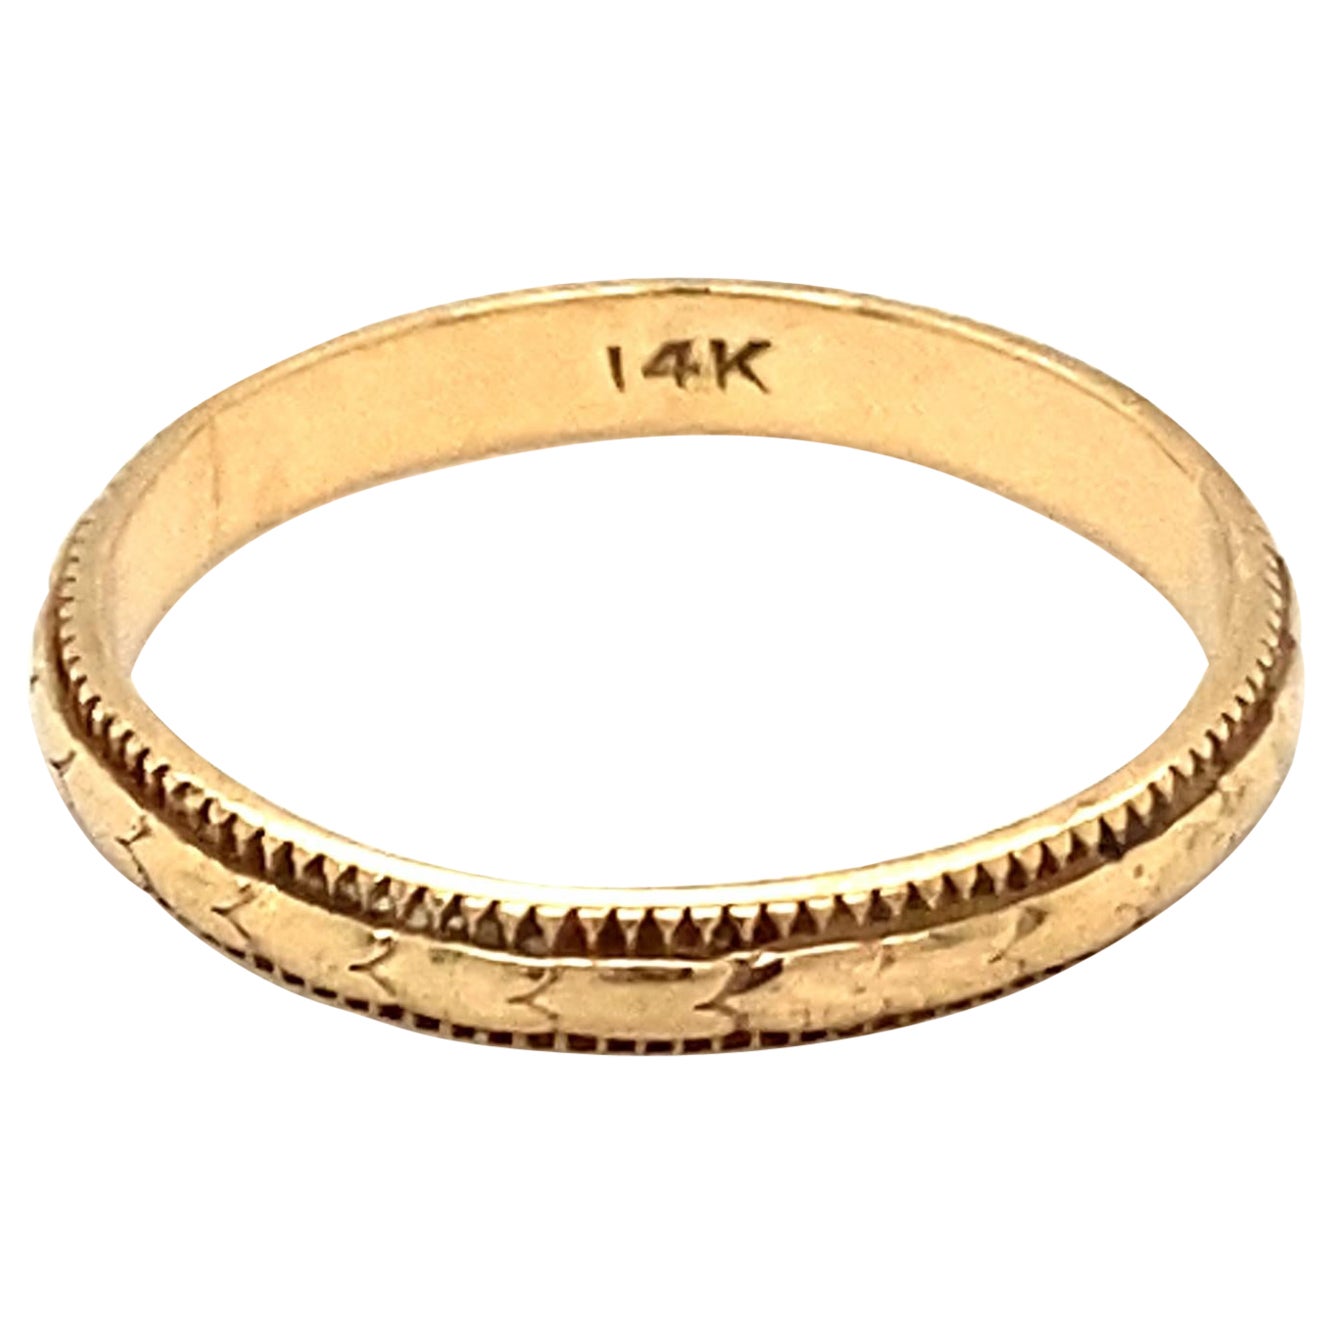 Circa 1920s, Art Deco Etched Gold Band Ring in 14 Karat Yellow Gold For Sale